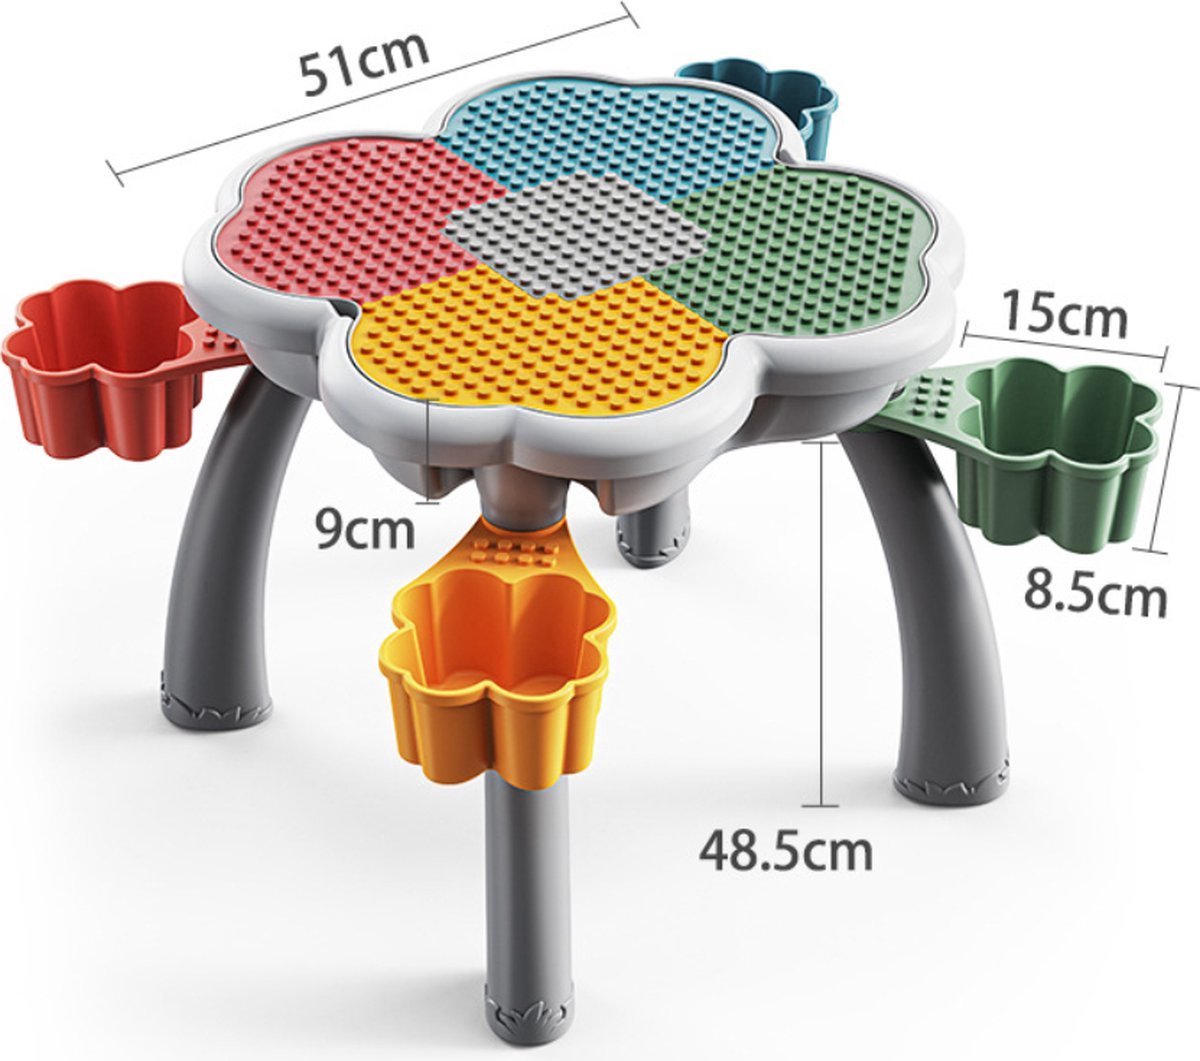 Play table set "Flower" - table compatible with DUPLO + 152 piece marble race track + 1 bunny chair